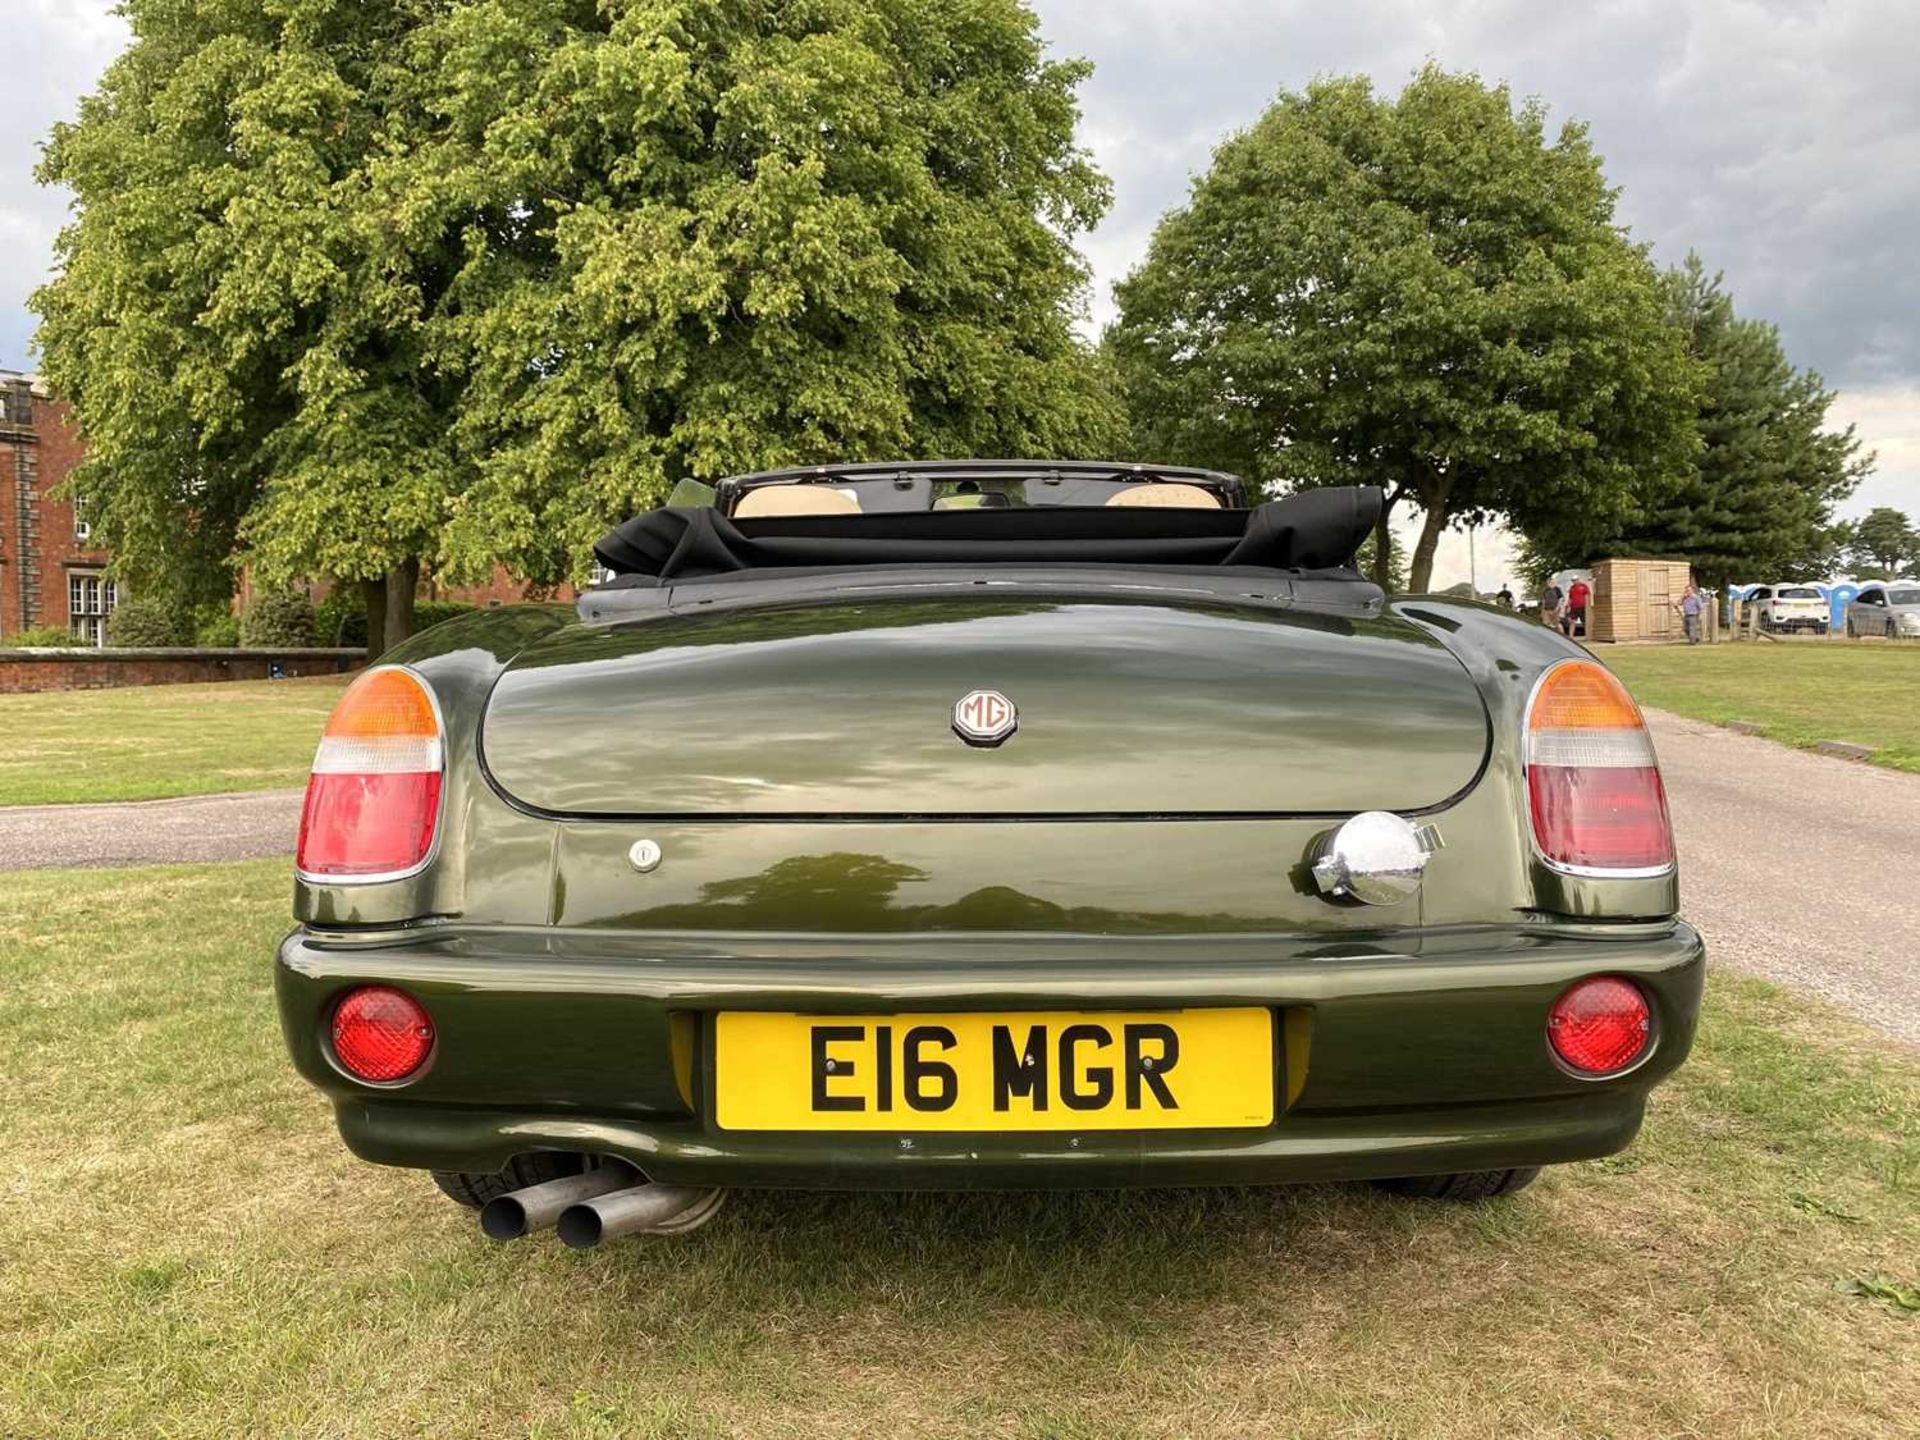 1995 MG RV8 A rare and sought-after car fitted with power steering - Image 14 of 45